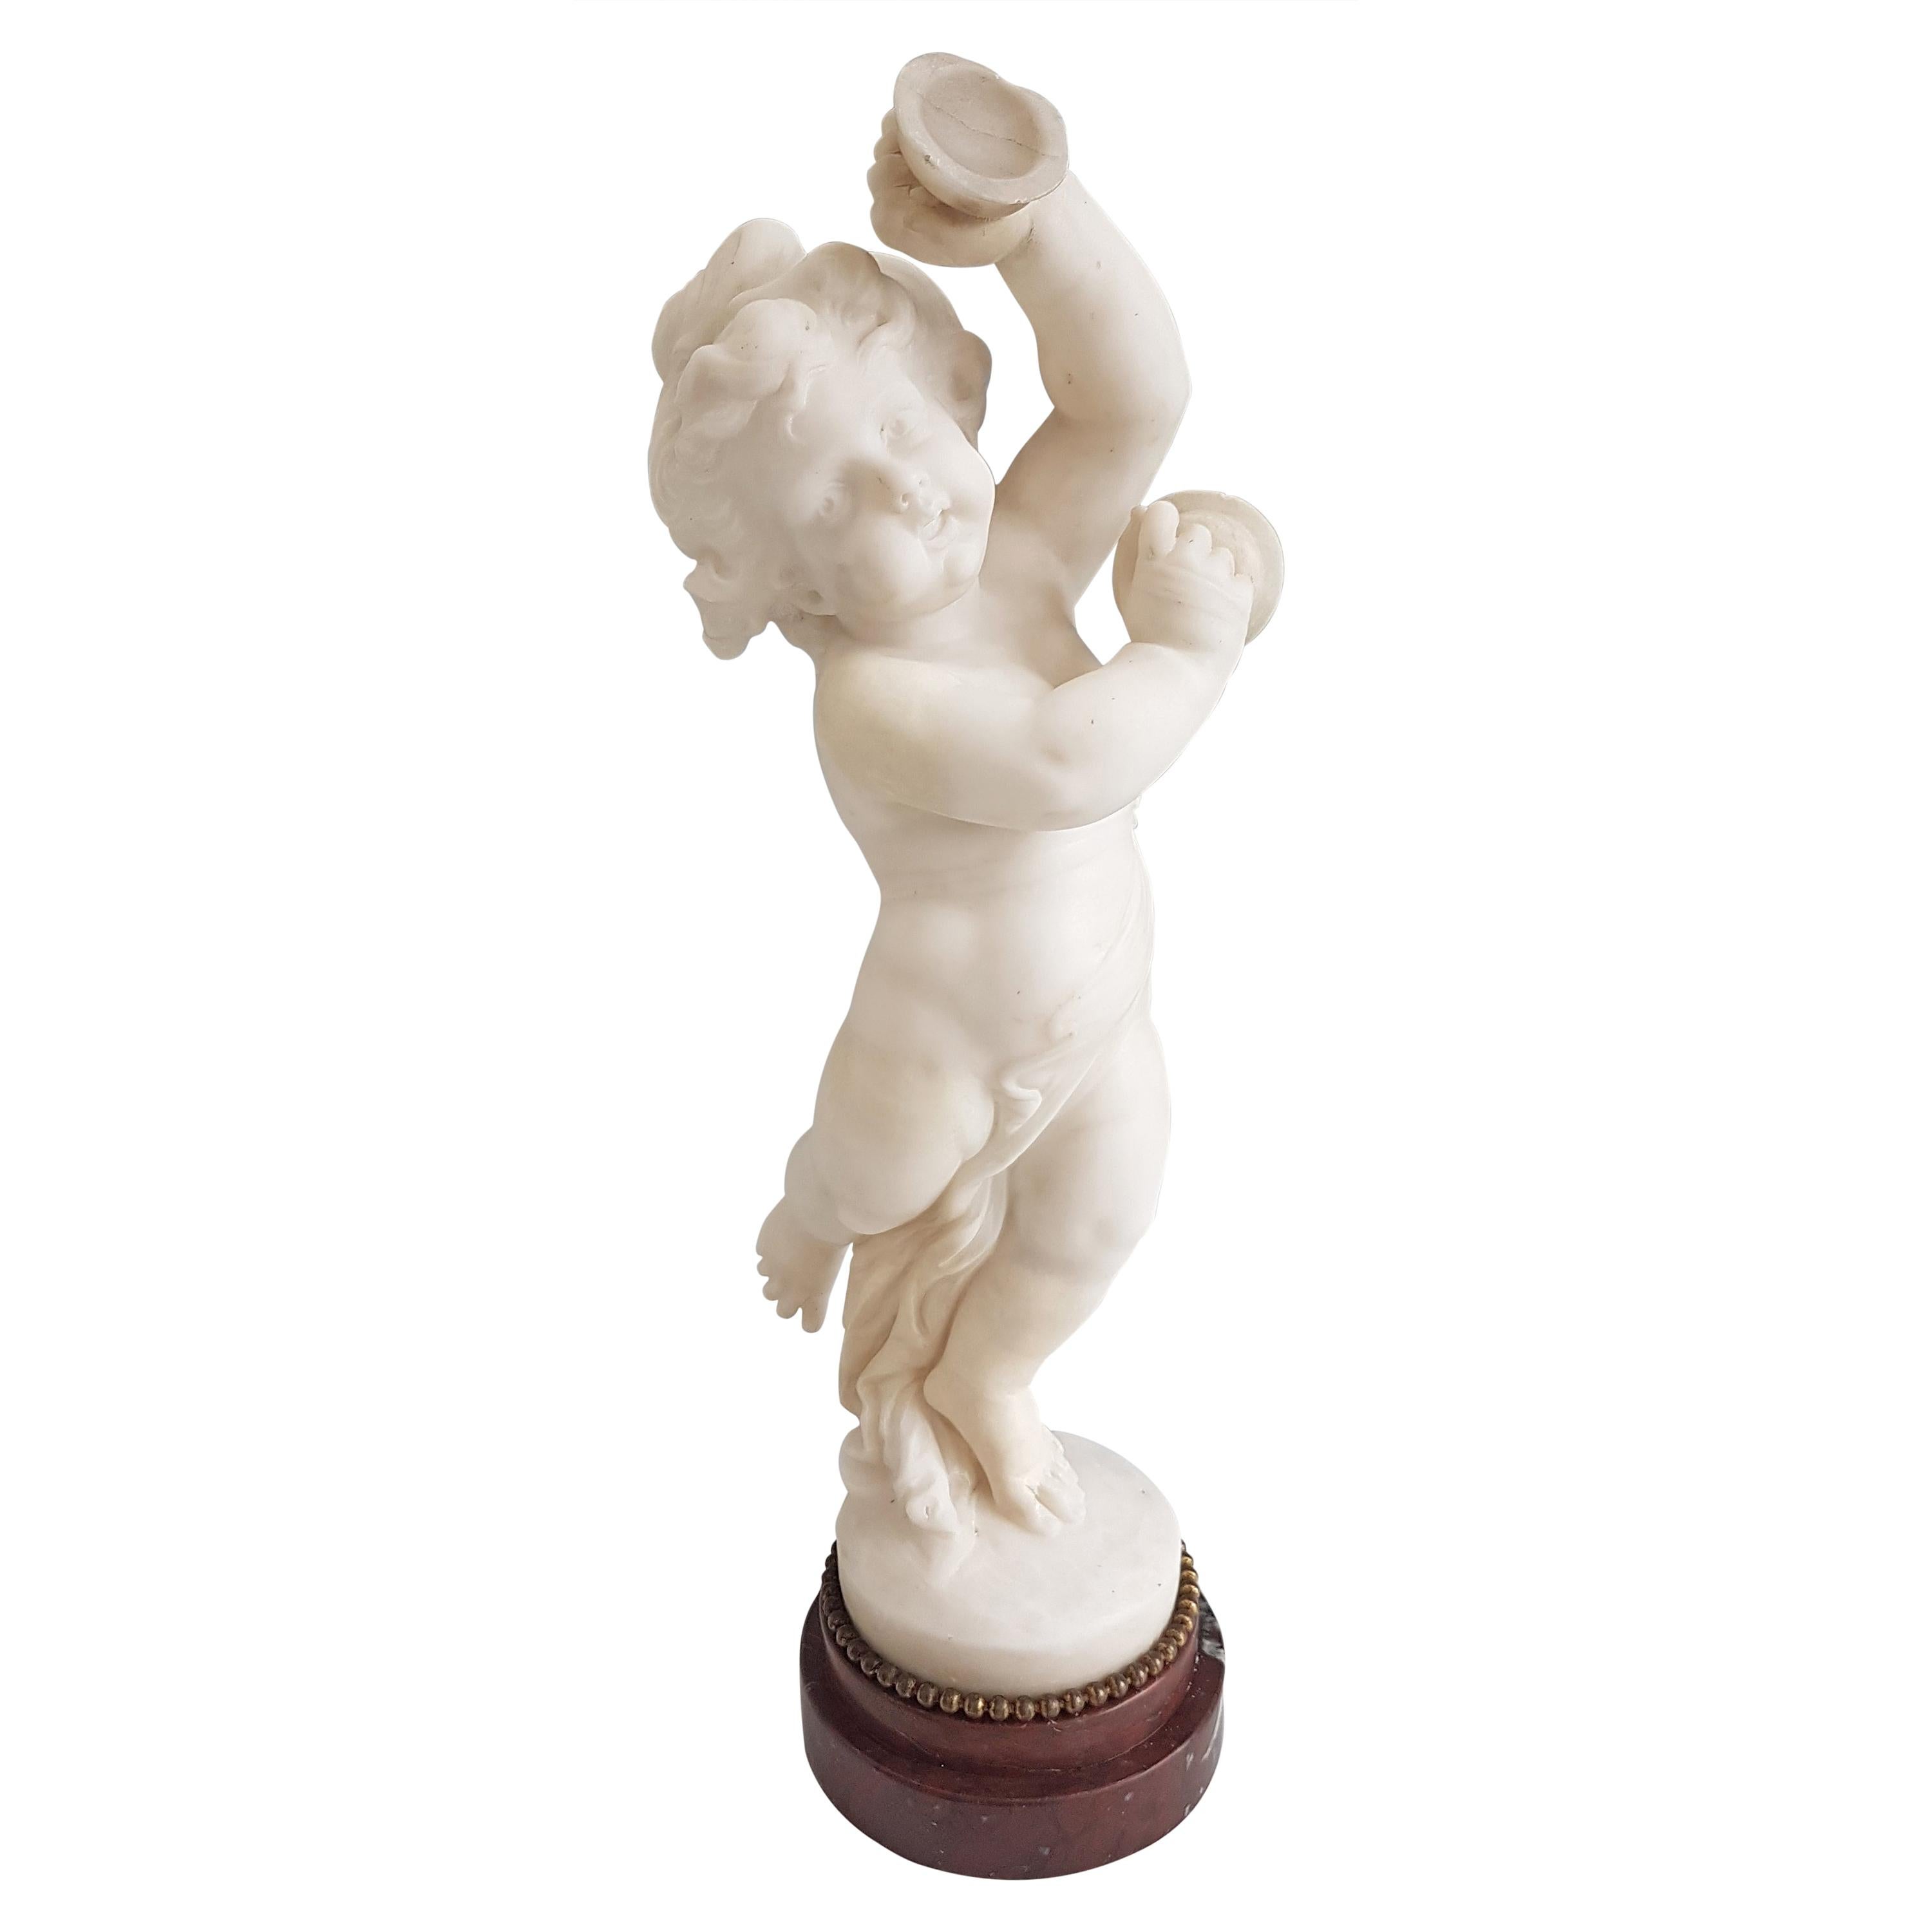 Antique Carrera Marble of a Dancing Putti playing Cymbals after Clodion